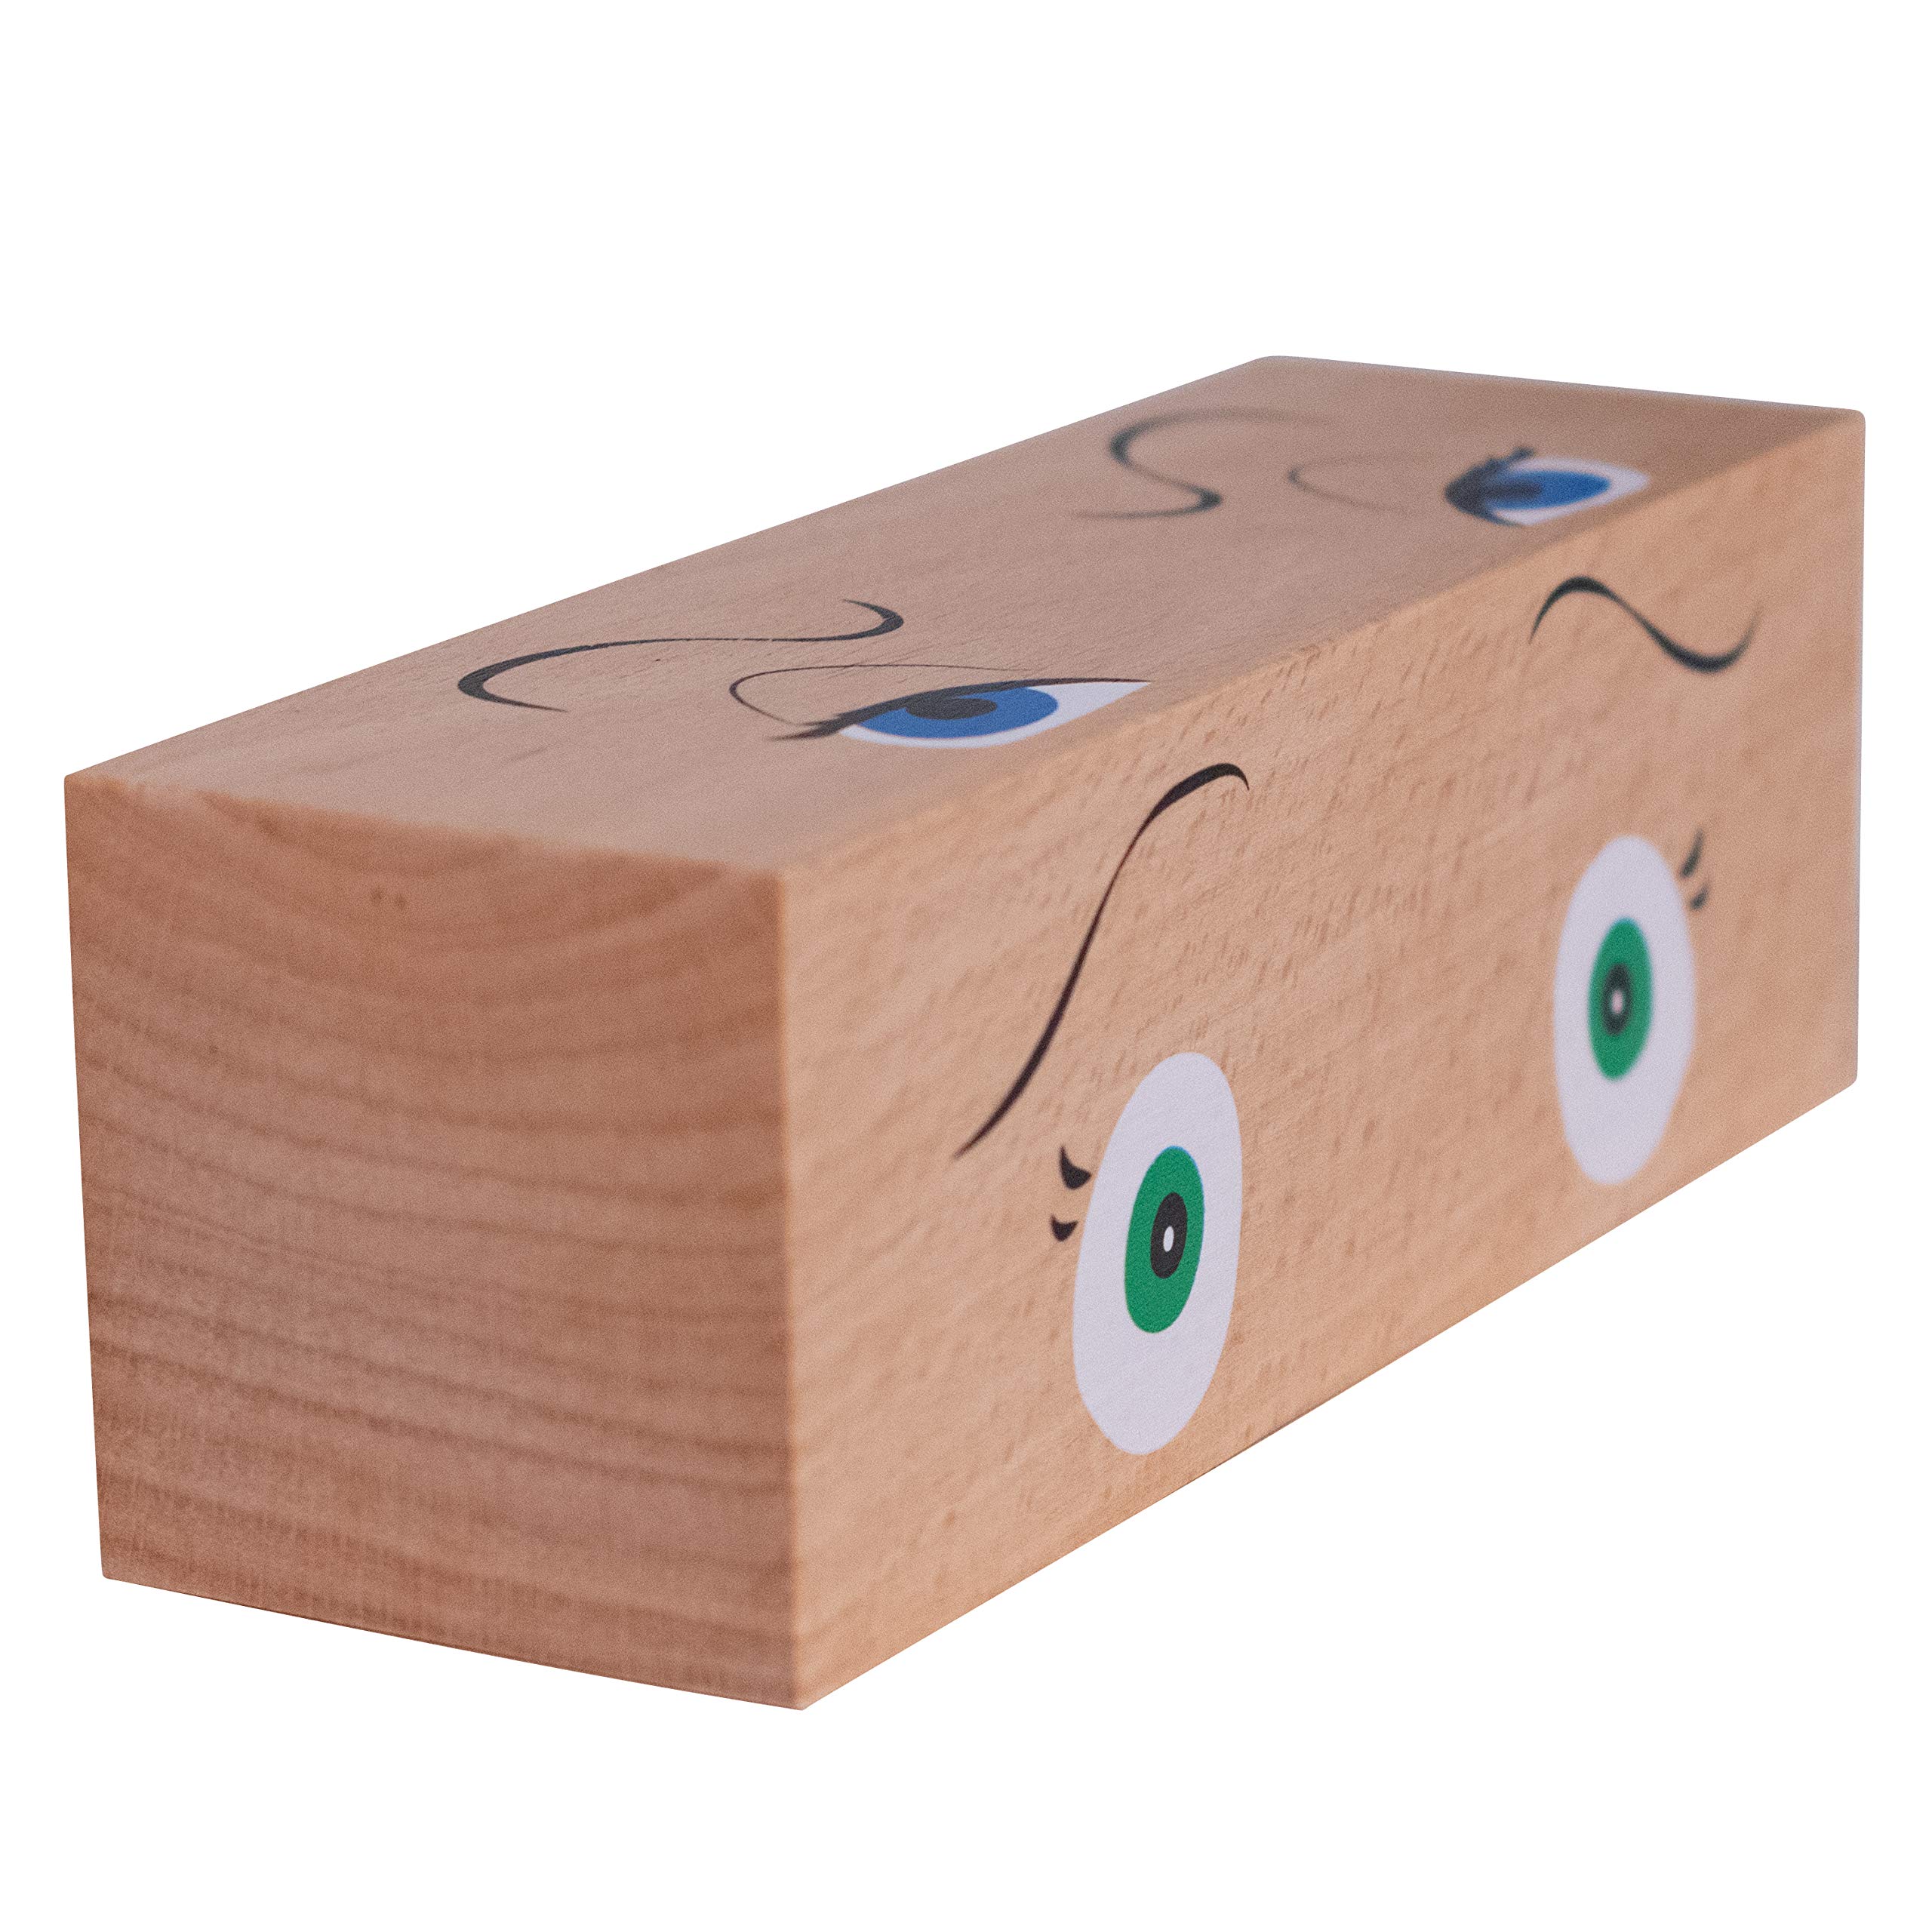 THE FRECKLED FROG - FF550 How Am I Feeling Blocks - Ages 1+ - Mix and Match Pieces to Make Expressive Faces - 4,000+ Variations - Social Emotional Learning Toy for Toddlers